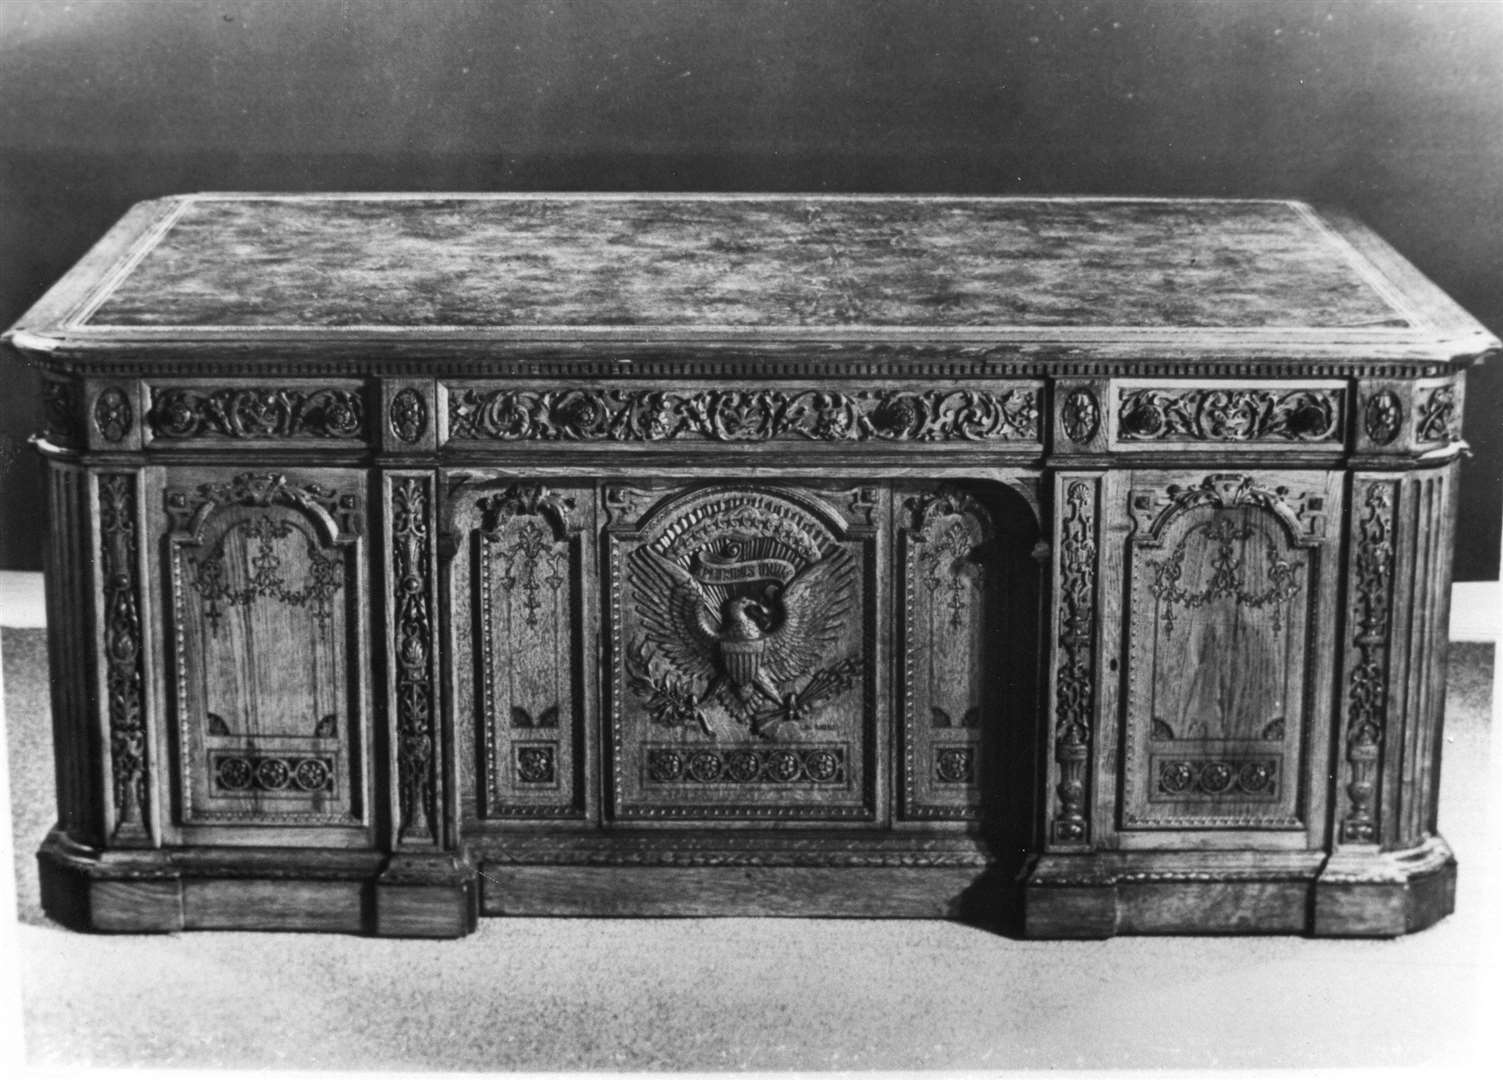 The Resolute Desk was made in Chatham and presented by Queen Victoria to President Rutherford B Hayes in 1880. Picture: Chatham Historic Dockyard